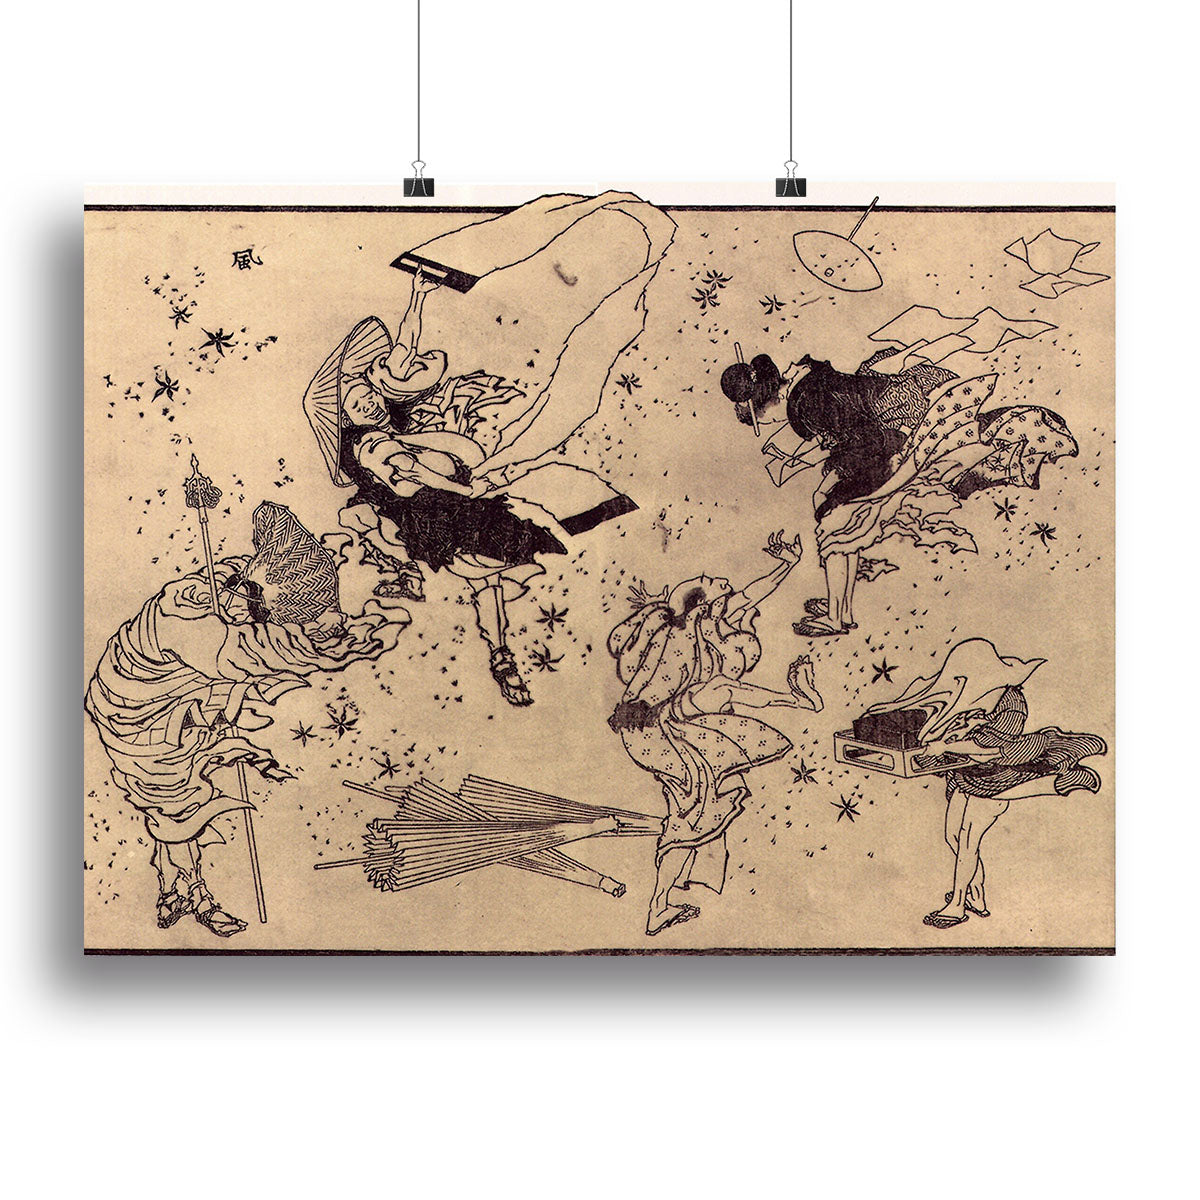 Sudden Wind by Hokusai Canvas Print or Poster - Canvas Art Rocks - 2